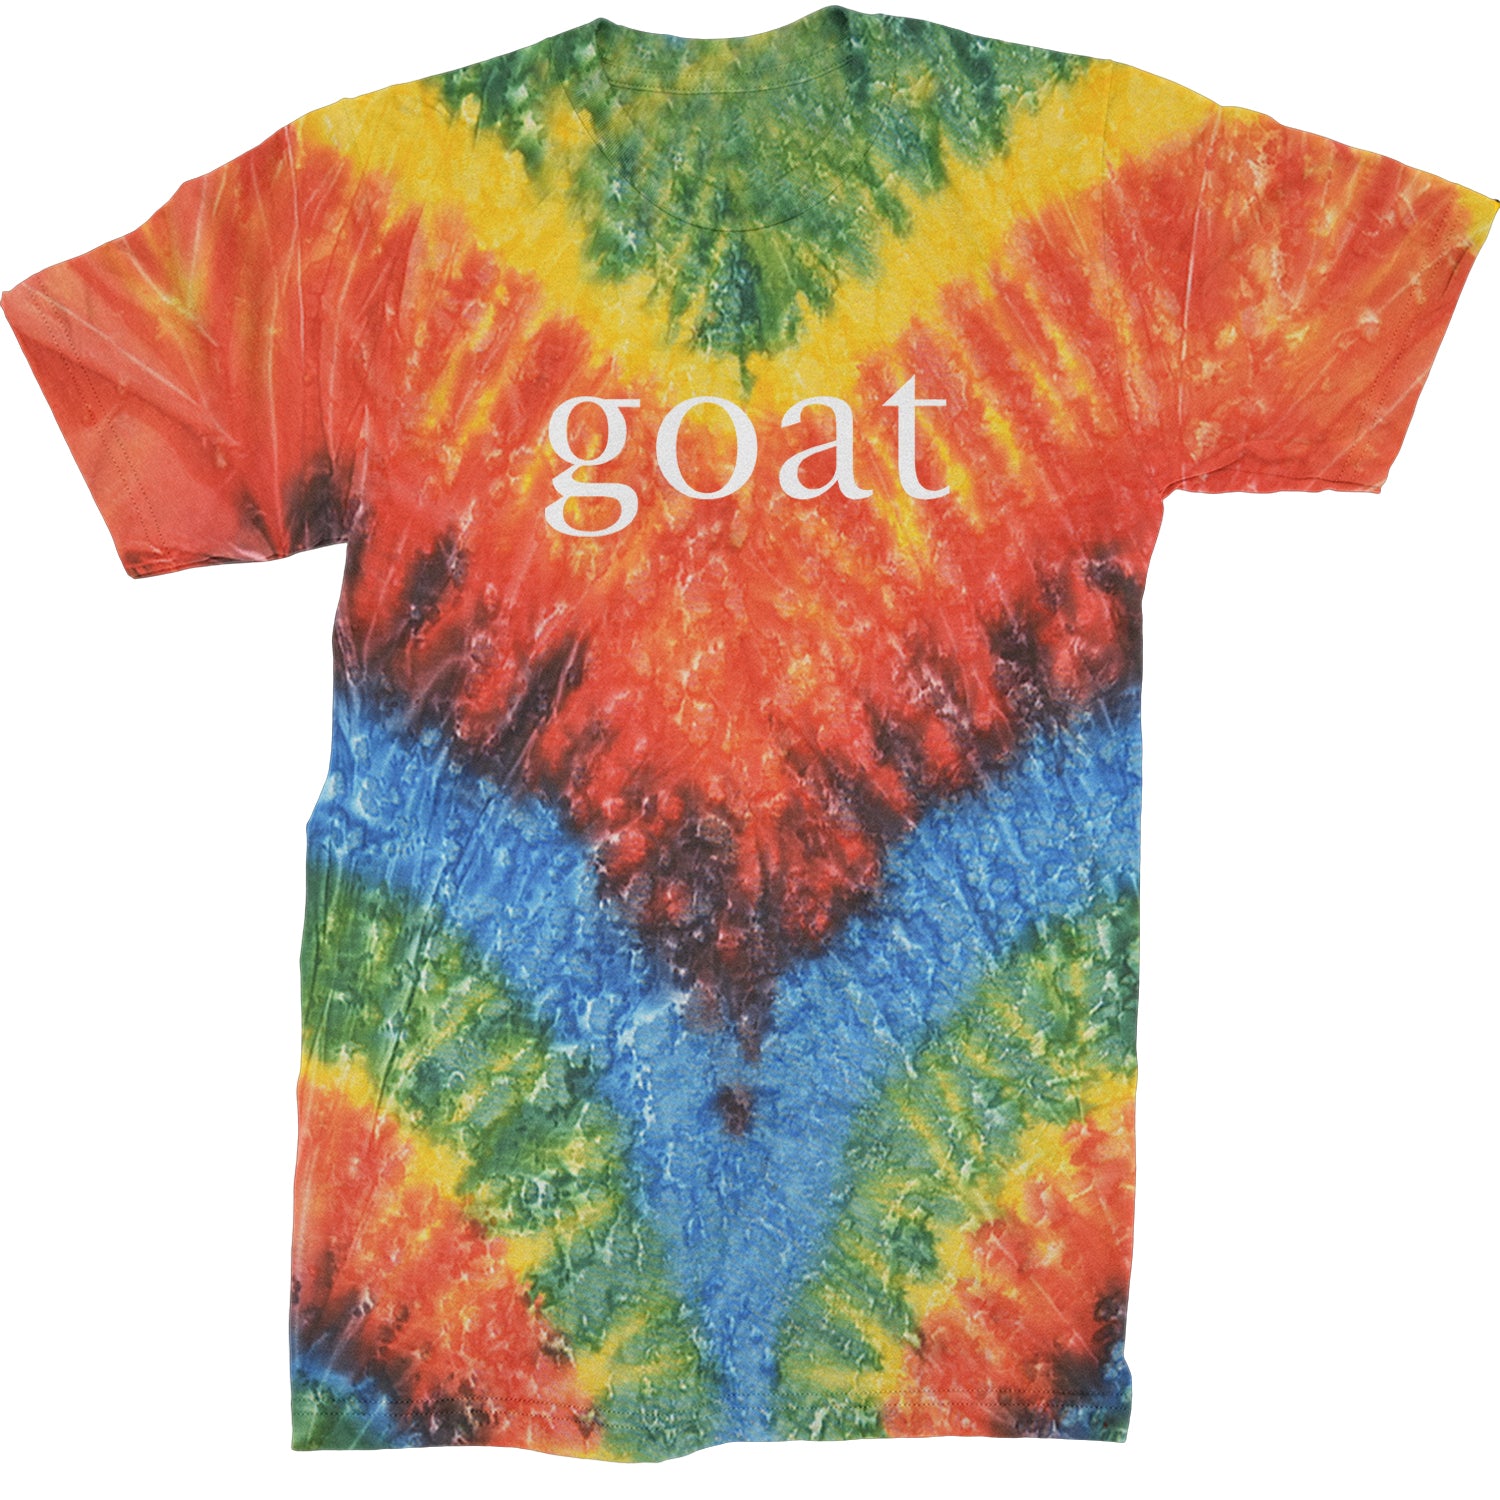 GOAT - Greatest Of All Time  Mens T-shirt Tie-Dye Woodstock